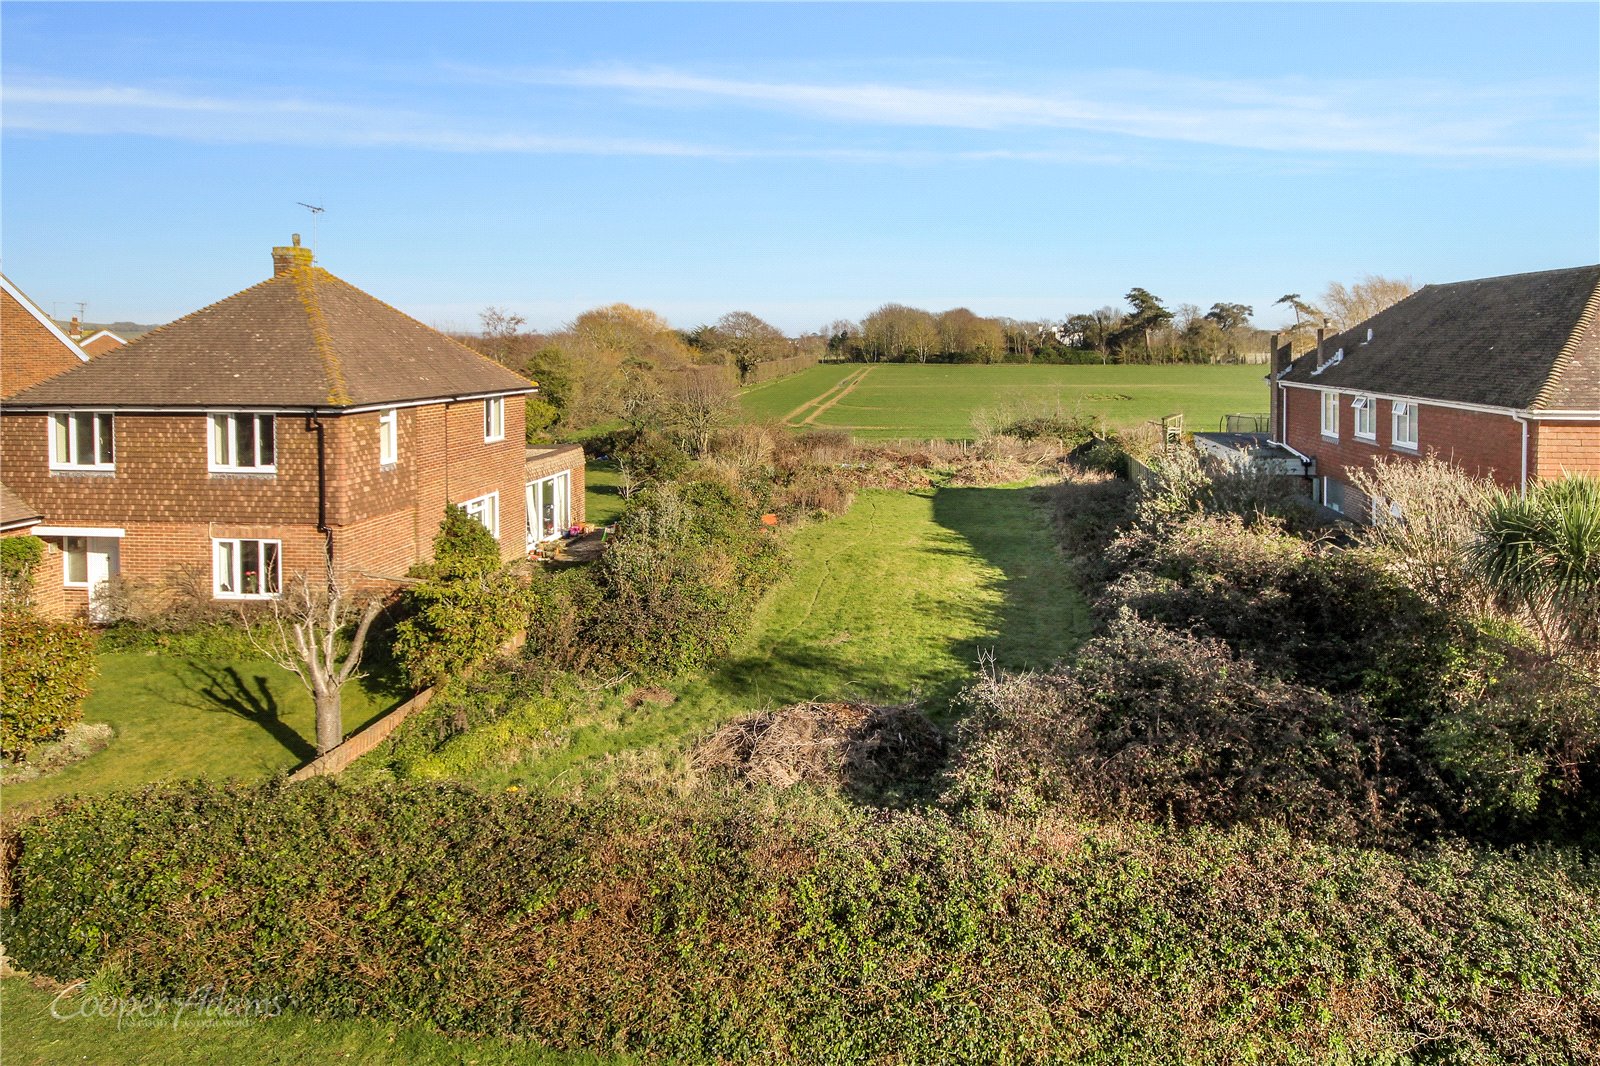 Land on Golden Avenue, East Preston - A success story (ref: ANG190201)